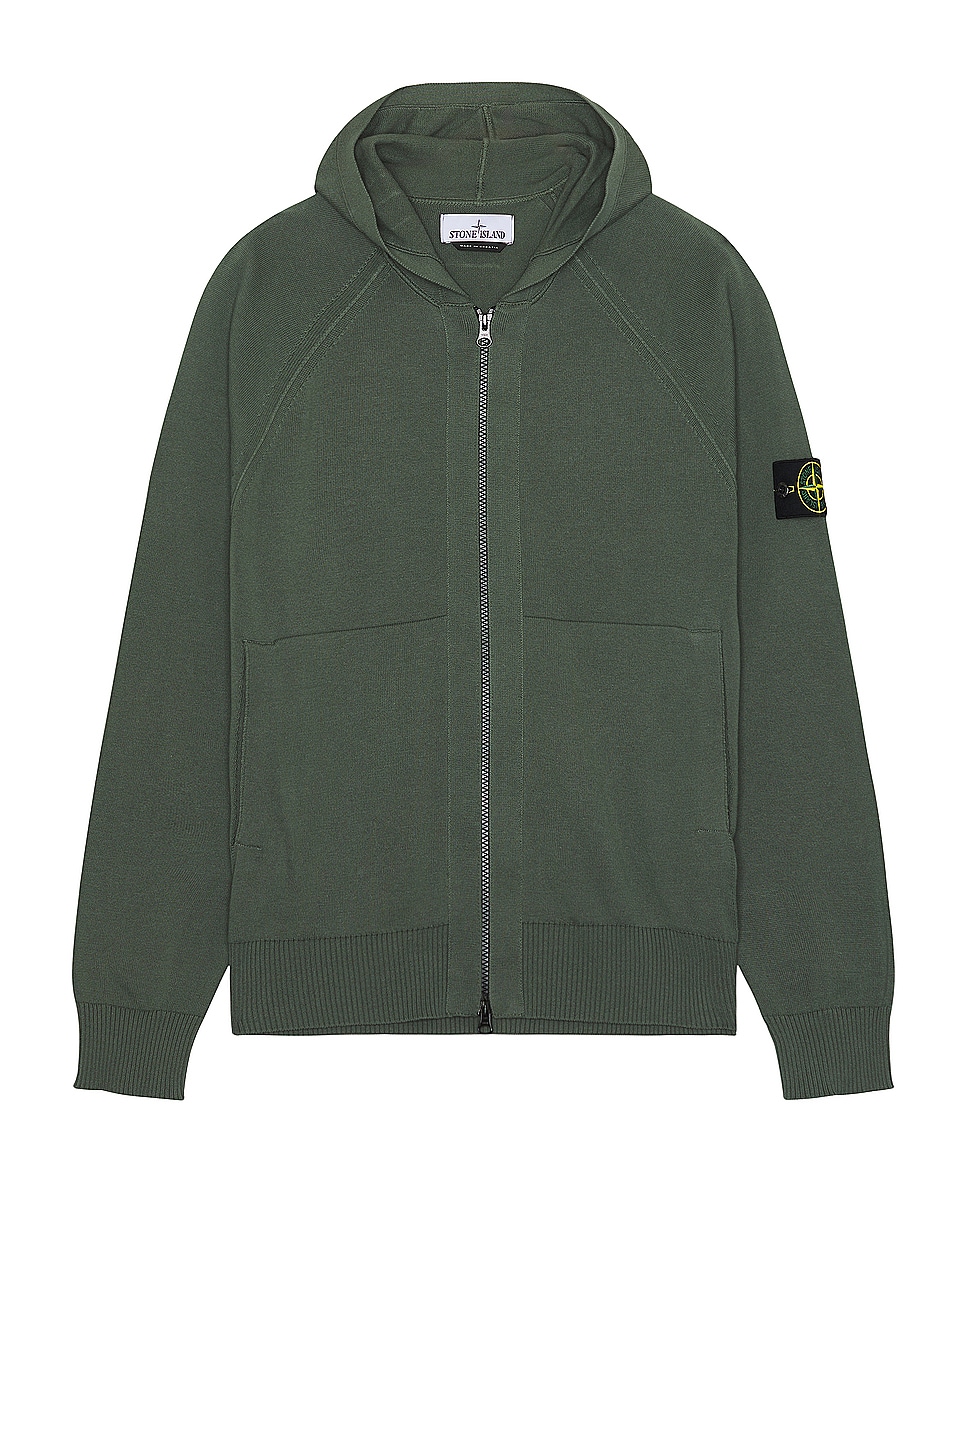 Image 1 of Stone Island Hooded Cardigan in Musk